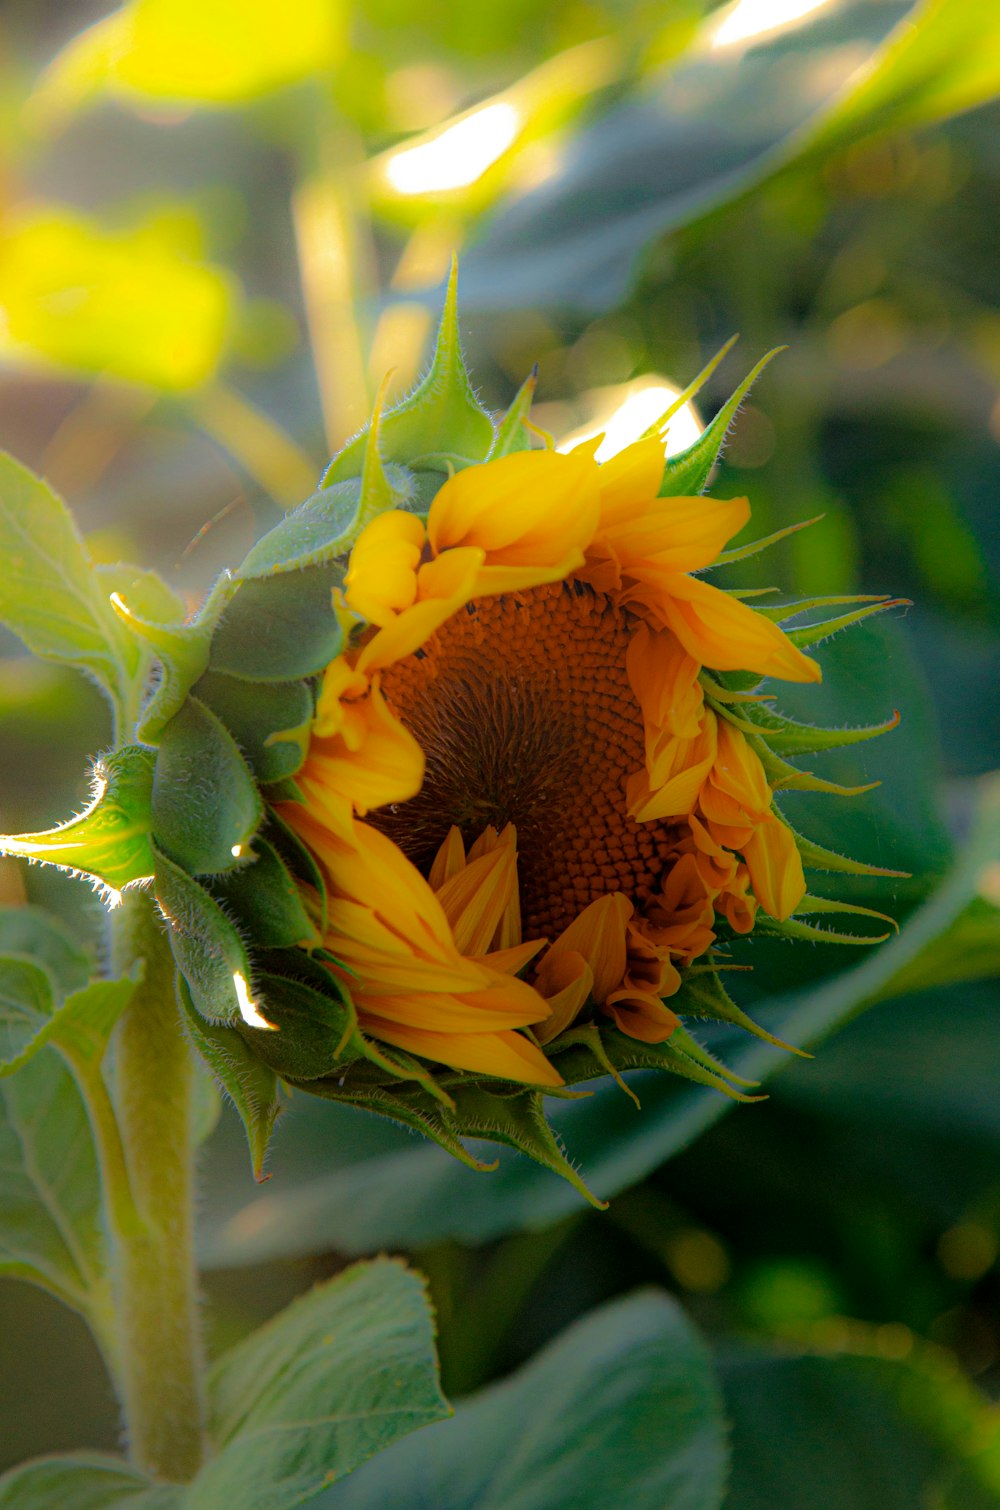 a sunflower growing on a plant